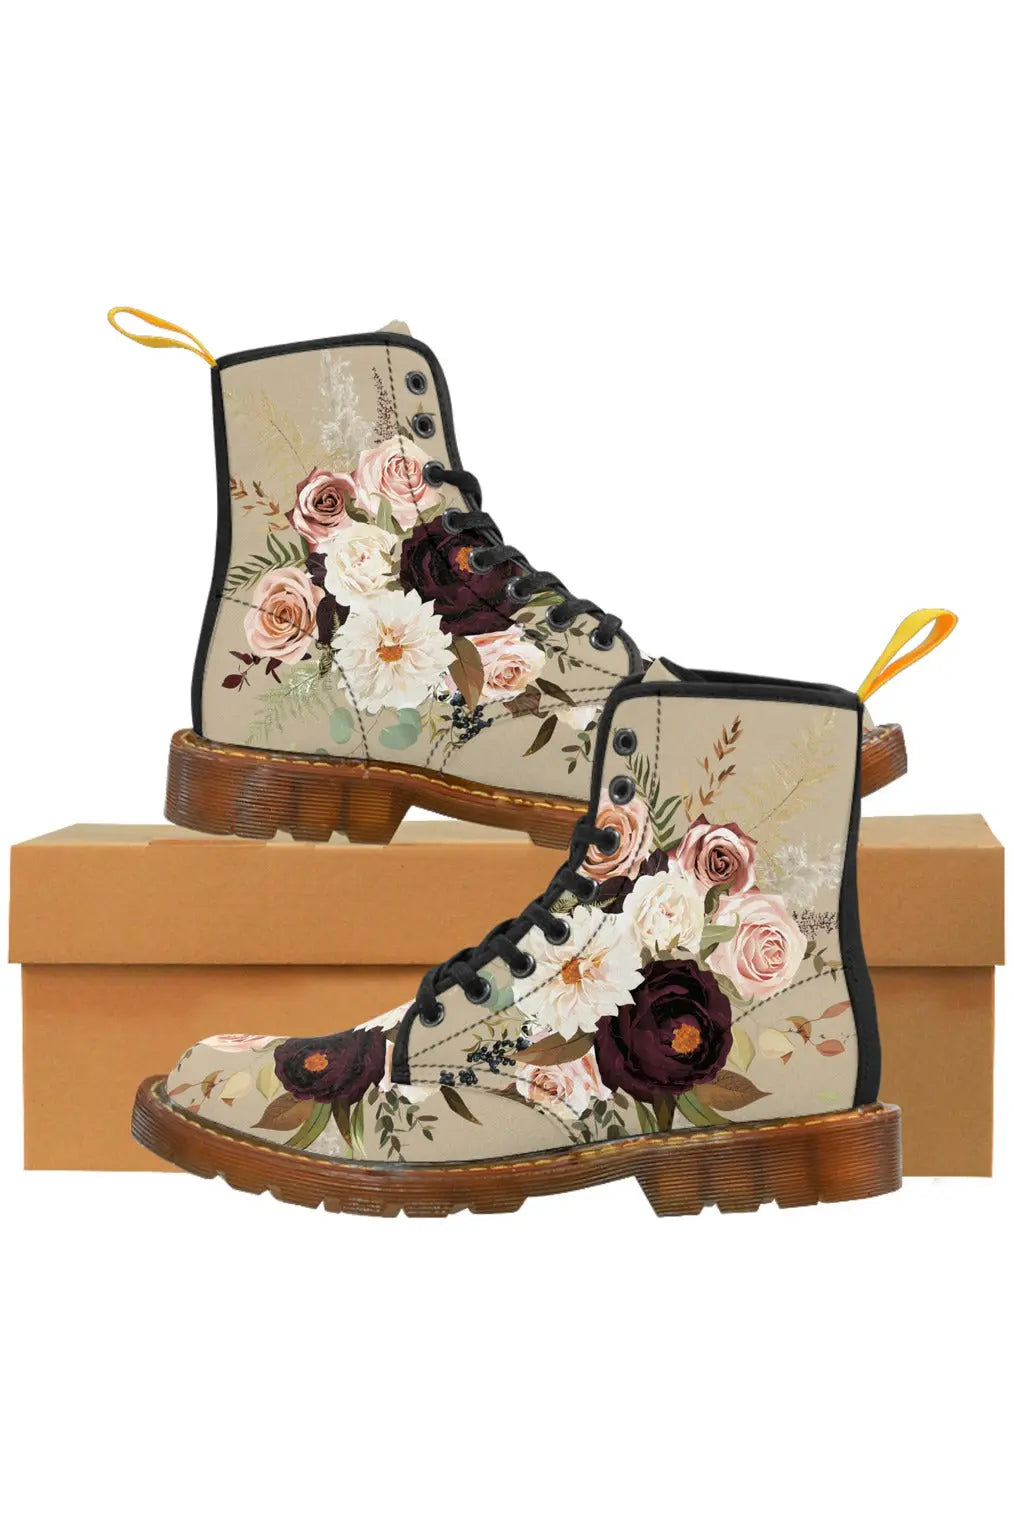  BOHO STAY WILD (Dark Bloom) Beige Women's Canvas Boots (Larger sizes 7-10.5 Mens) Shoes